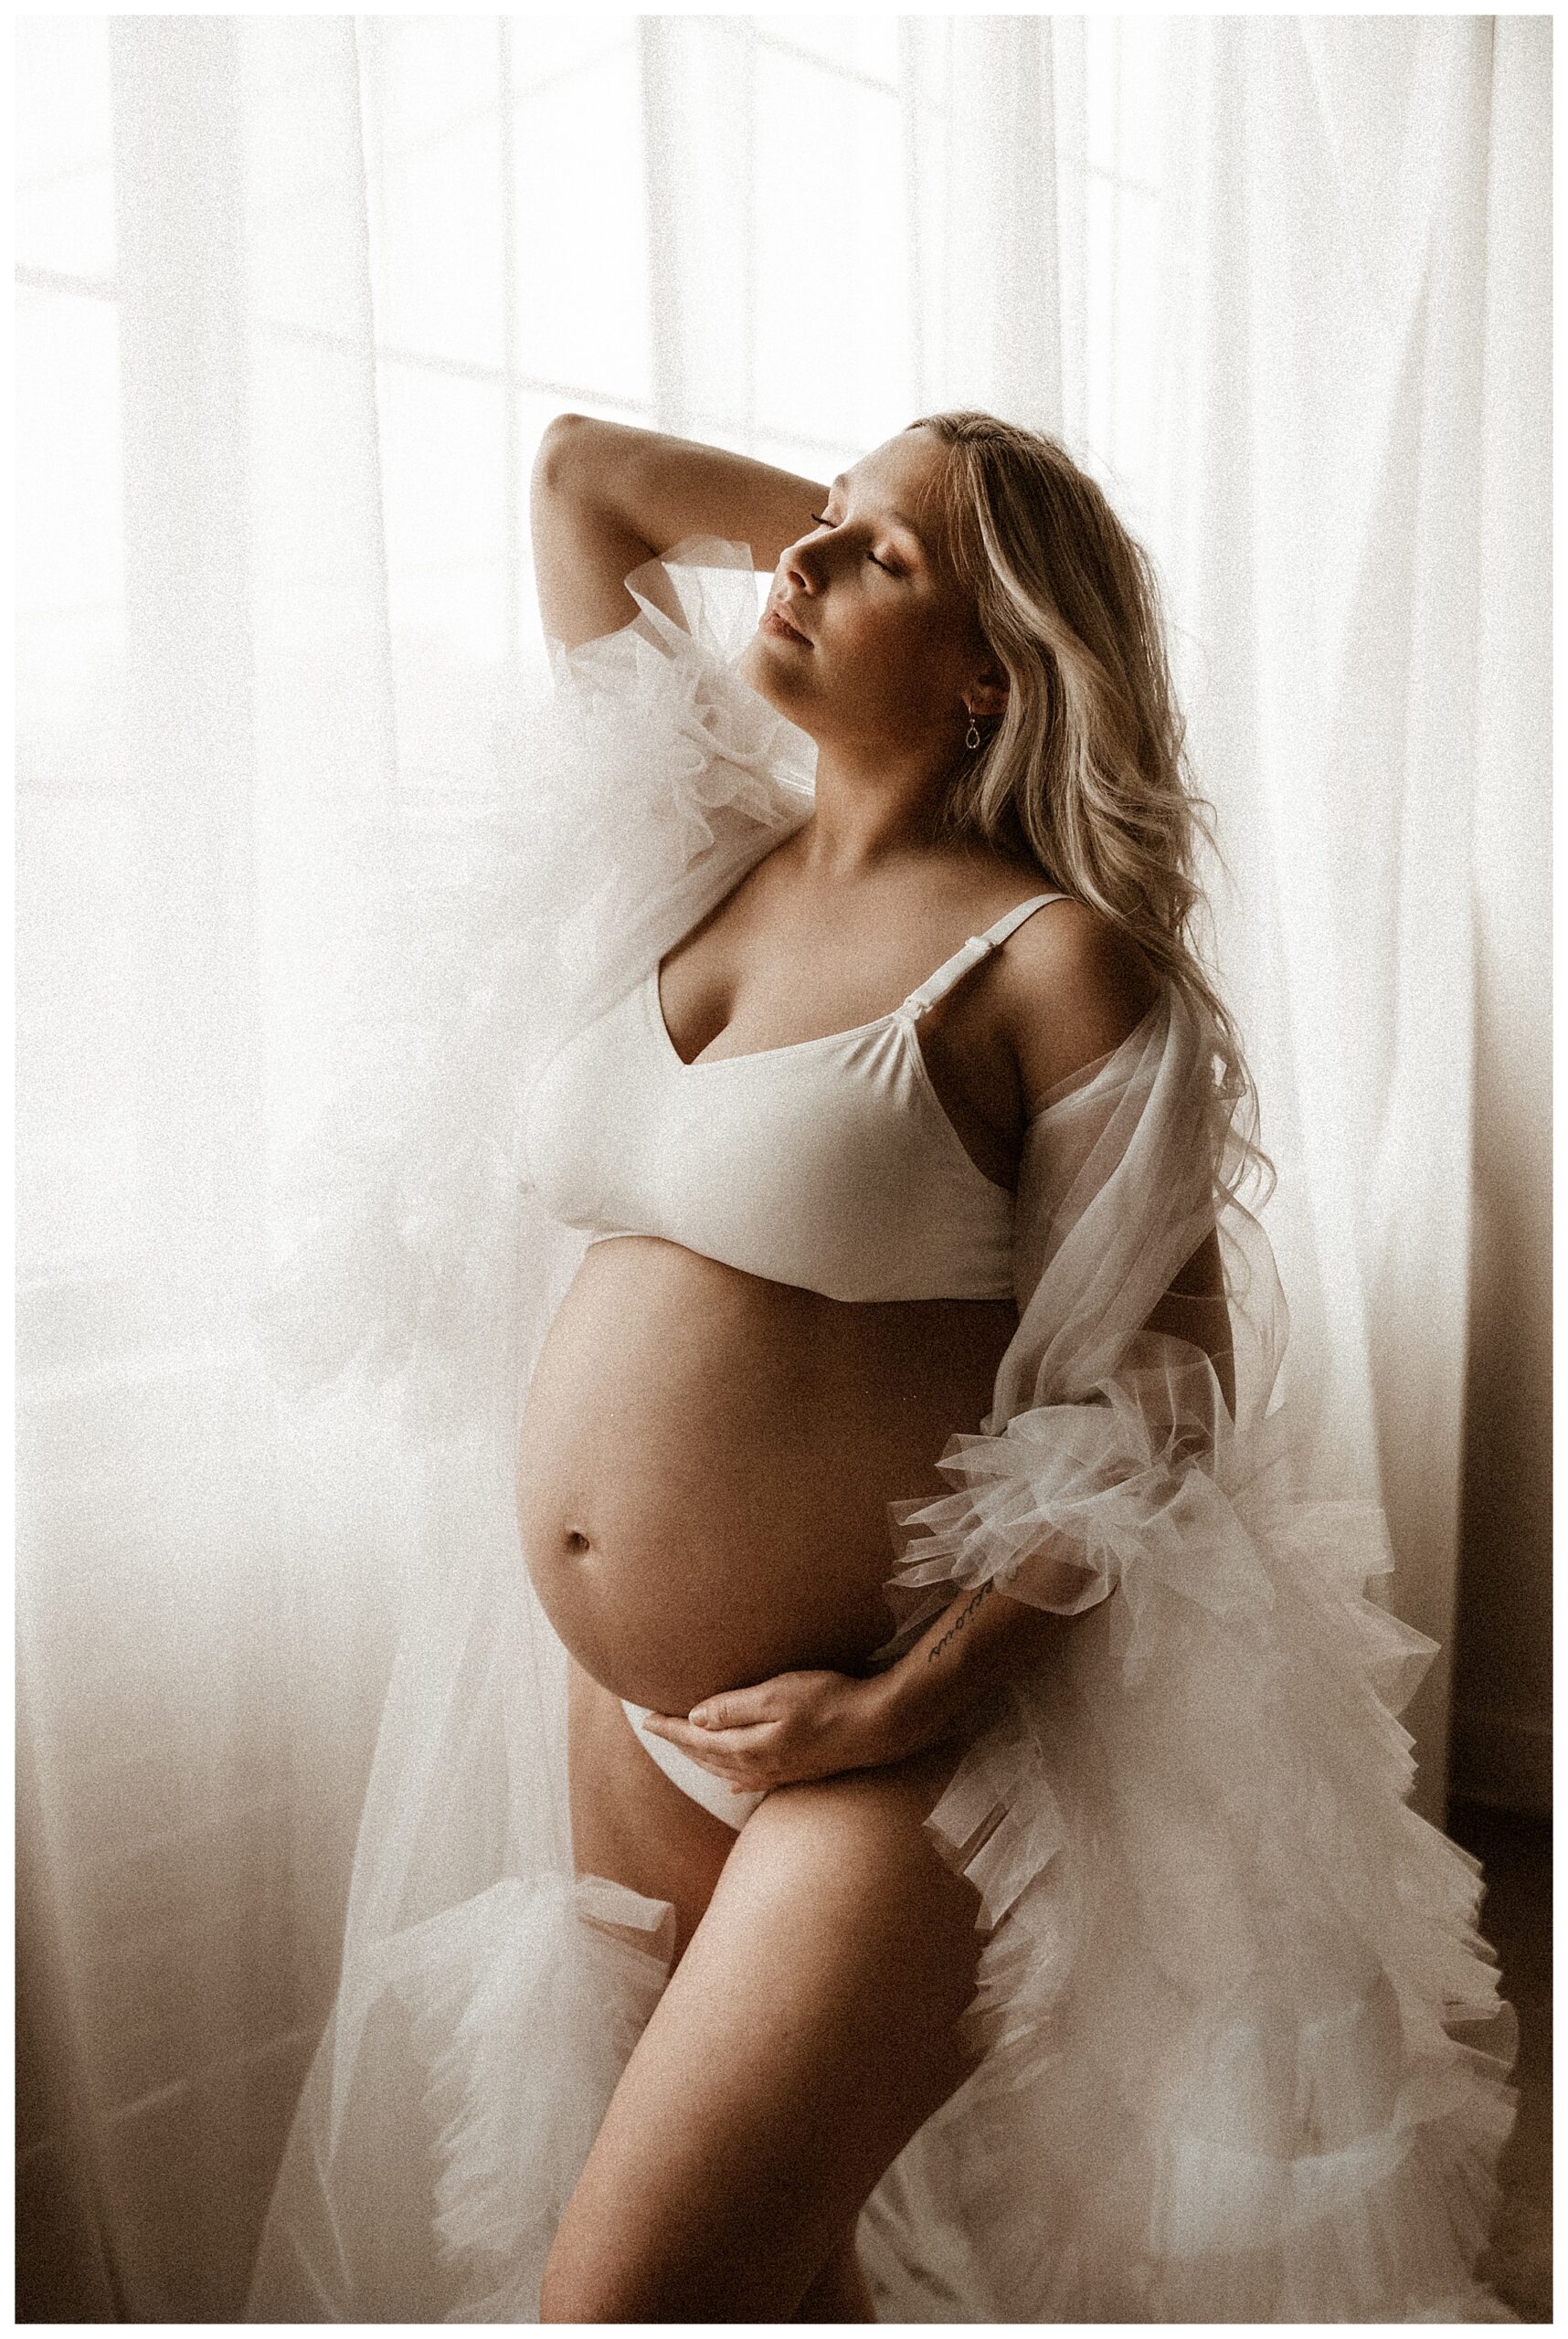 pregnant woman in sheer robe in front of curtains closing eyes during maternity session with fine art maternity photographer Rebecca Stephenson Photography O'fallon Missouri